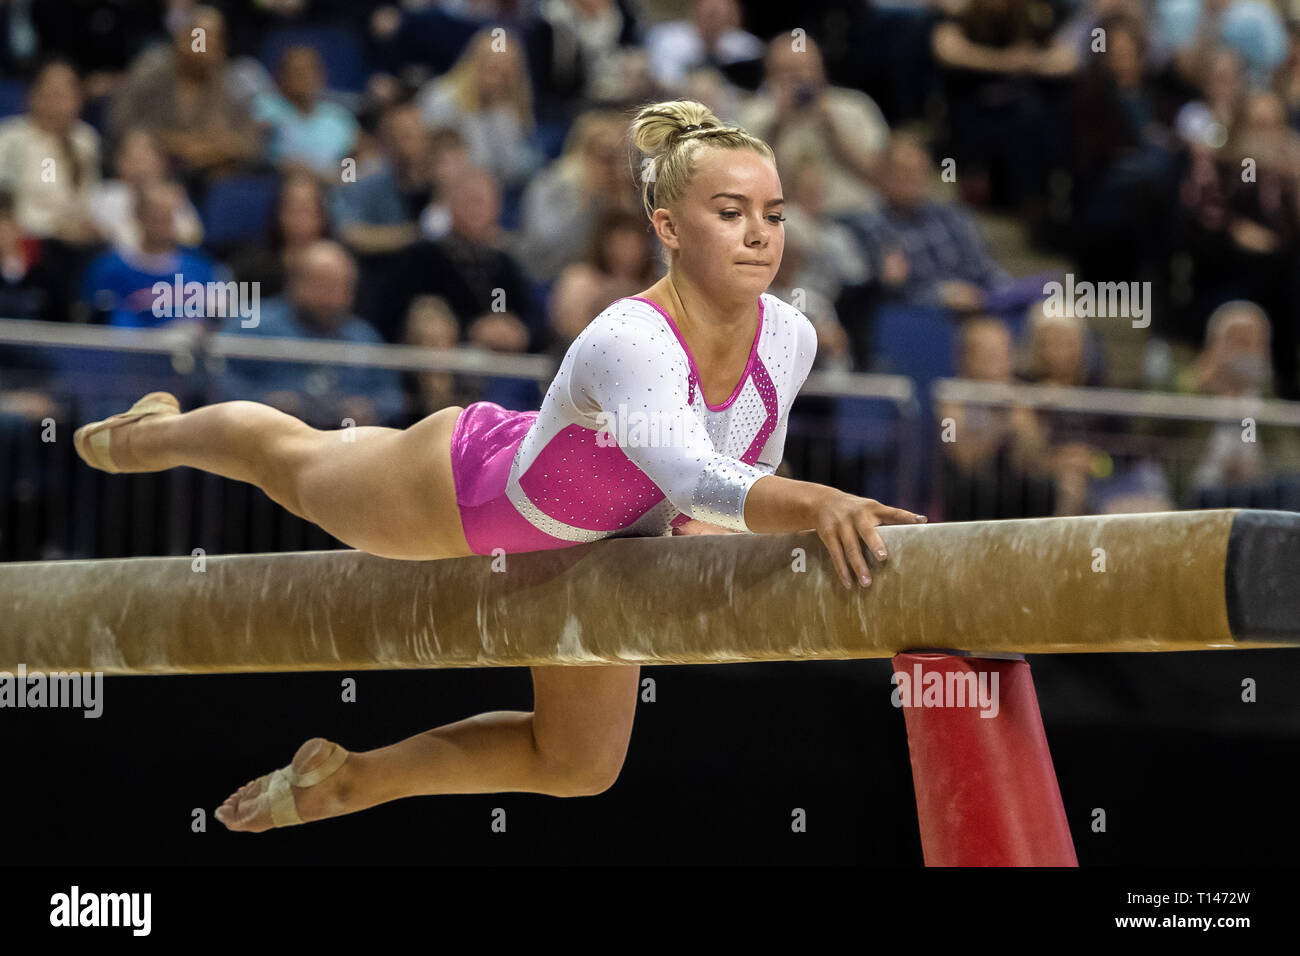 London, UK. 23rd March, 2019. Halle Hilton of Great Britain performs on the Beam during the Matchroom Multisport presents the 2019 Superstars of Gymnastics at The O2 Arena on Saturday, 23 March 2019. LONDON ENGLAND. Credit: Taka G Wu/Alamy News Stock Photo